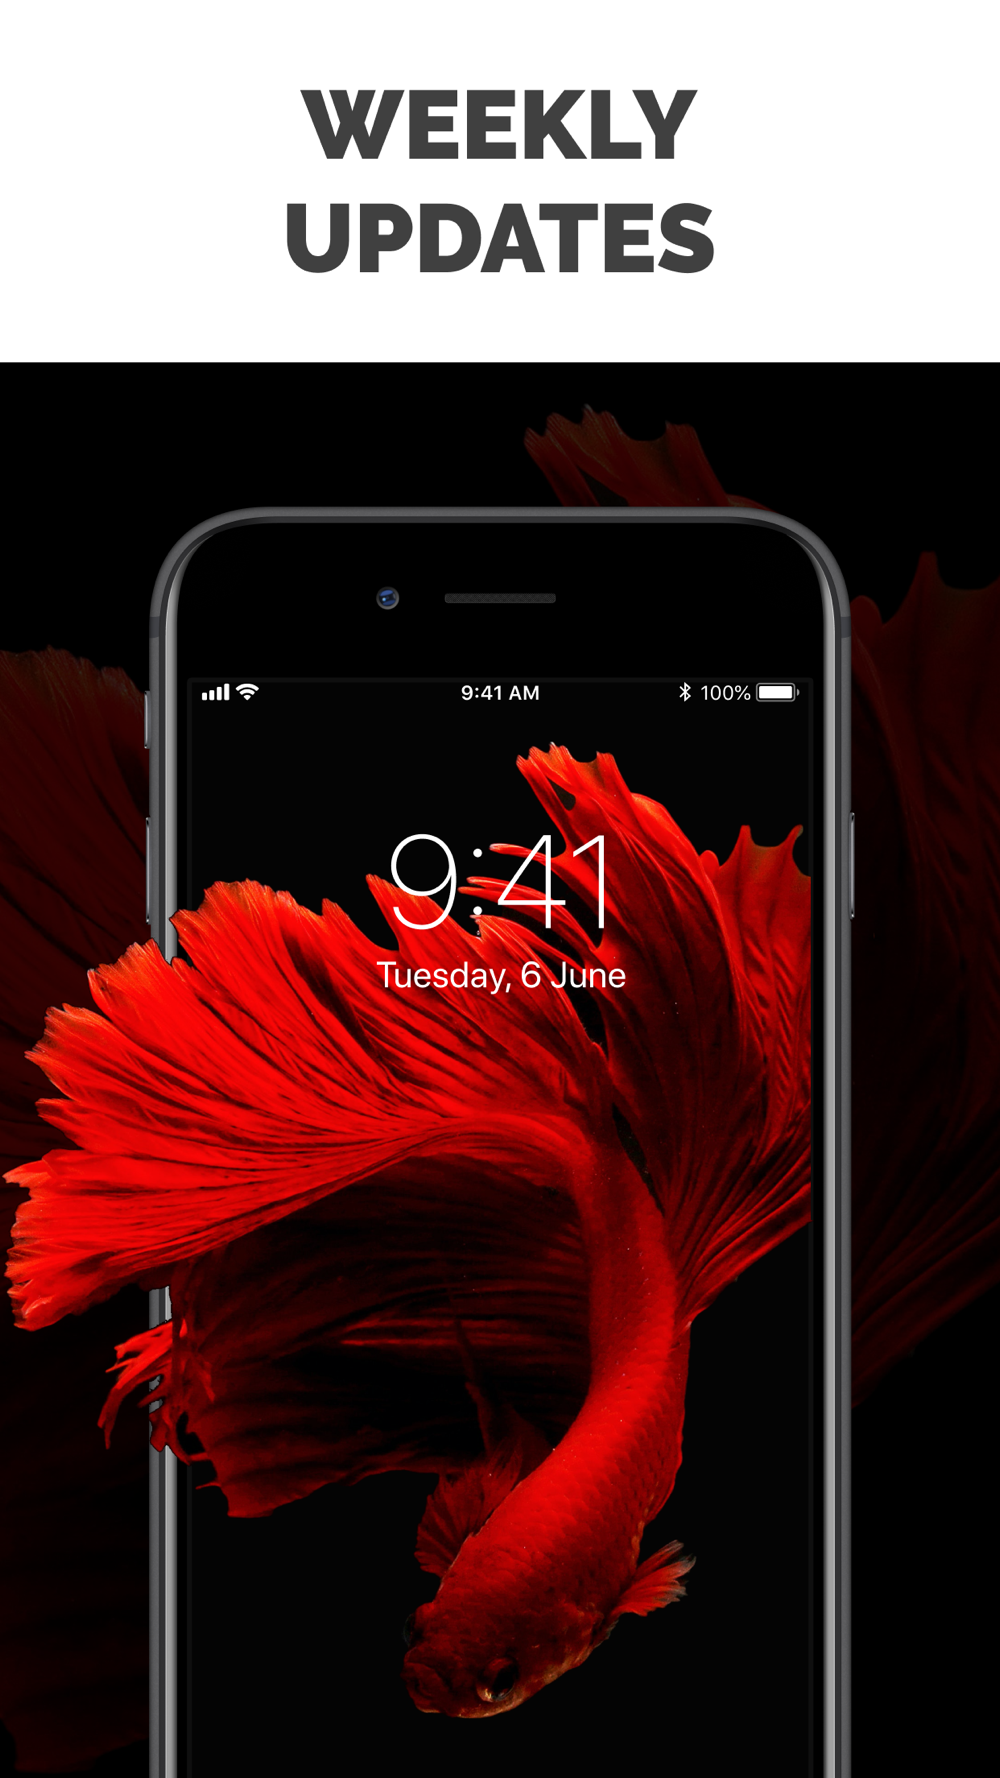 Live Wallpaper 4k, Watch Faces Free Download App for iPhone 